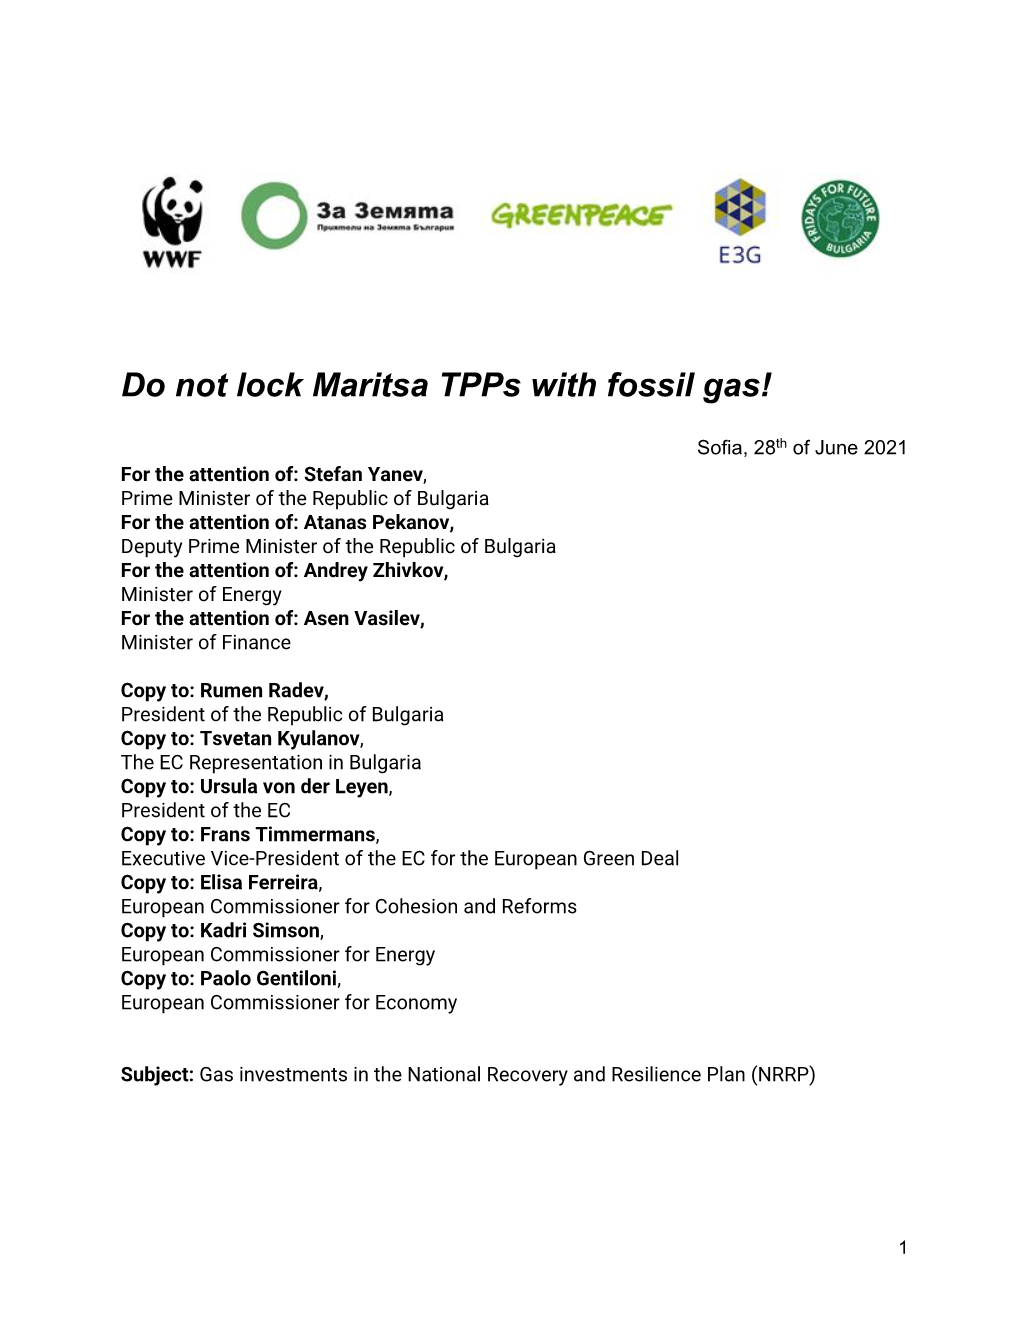 Do Not Lock Maritsa Tpps with Fossil Gas!